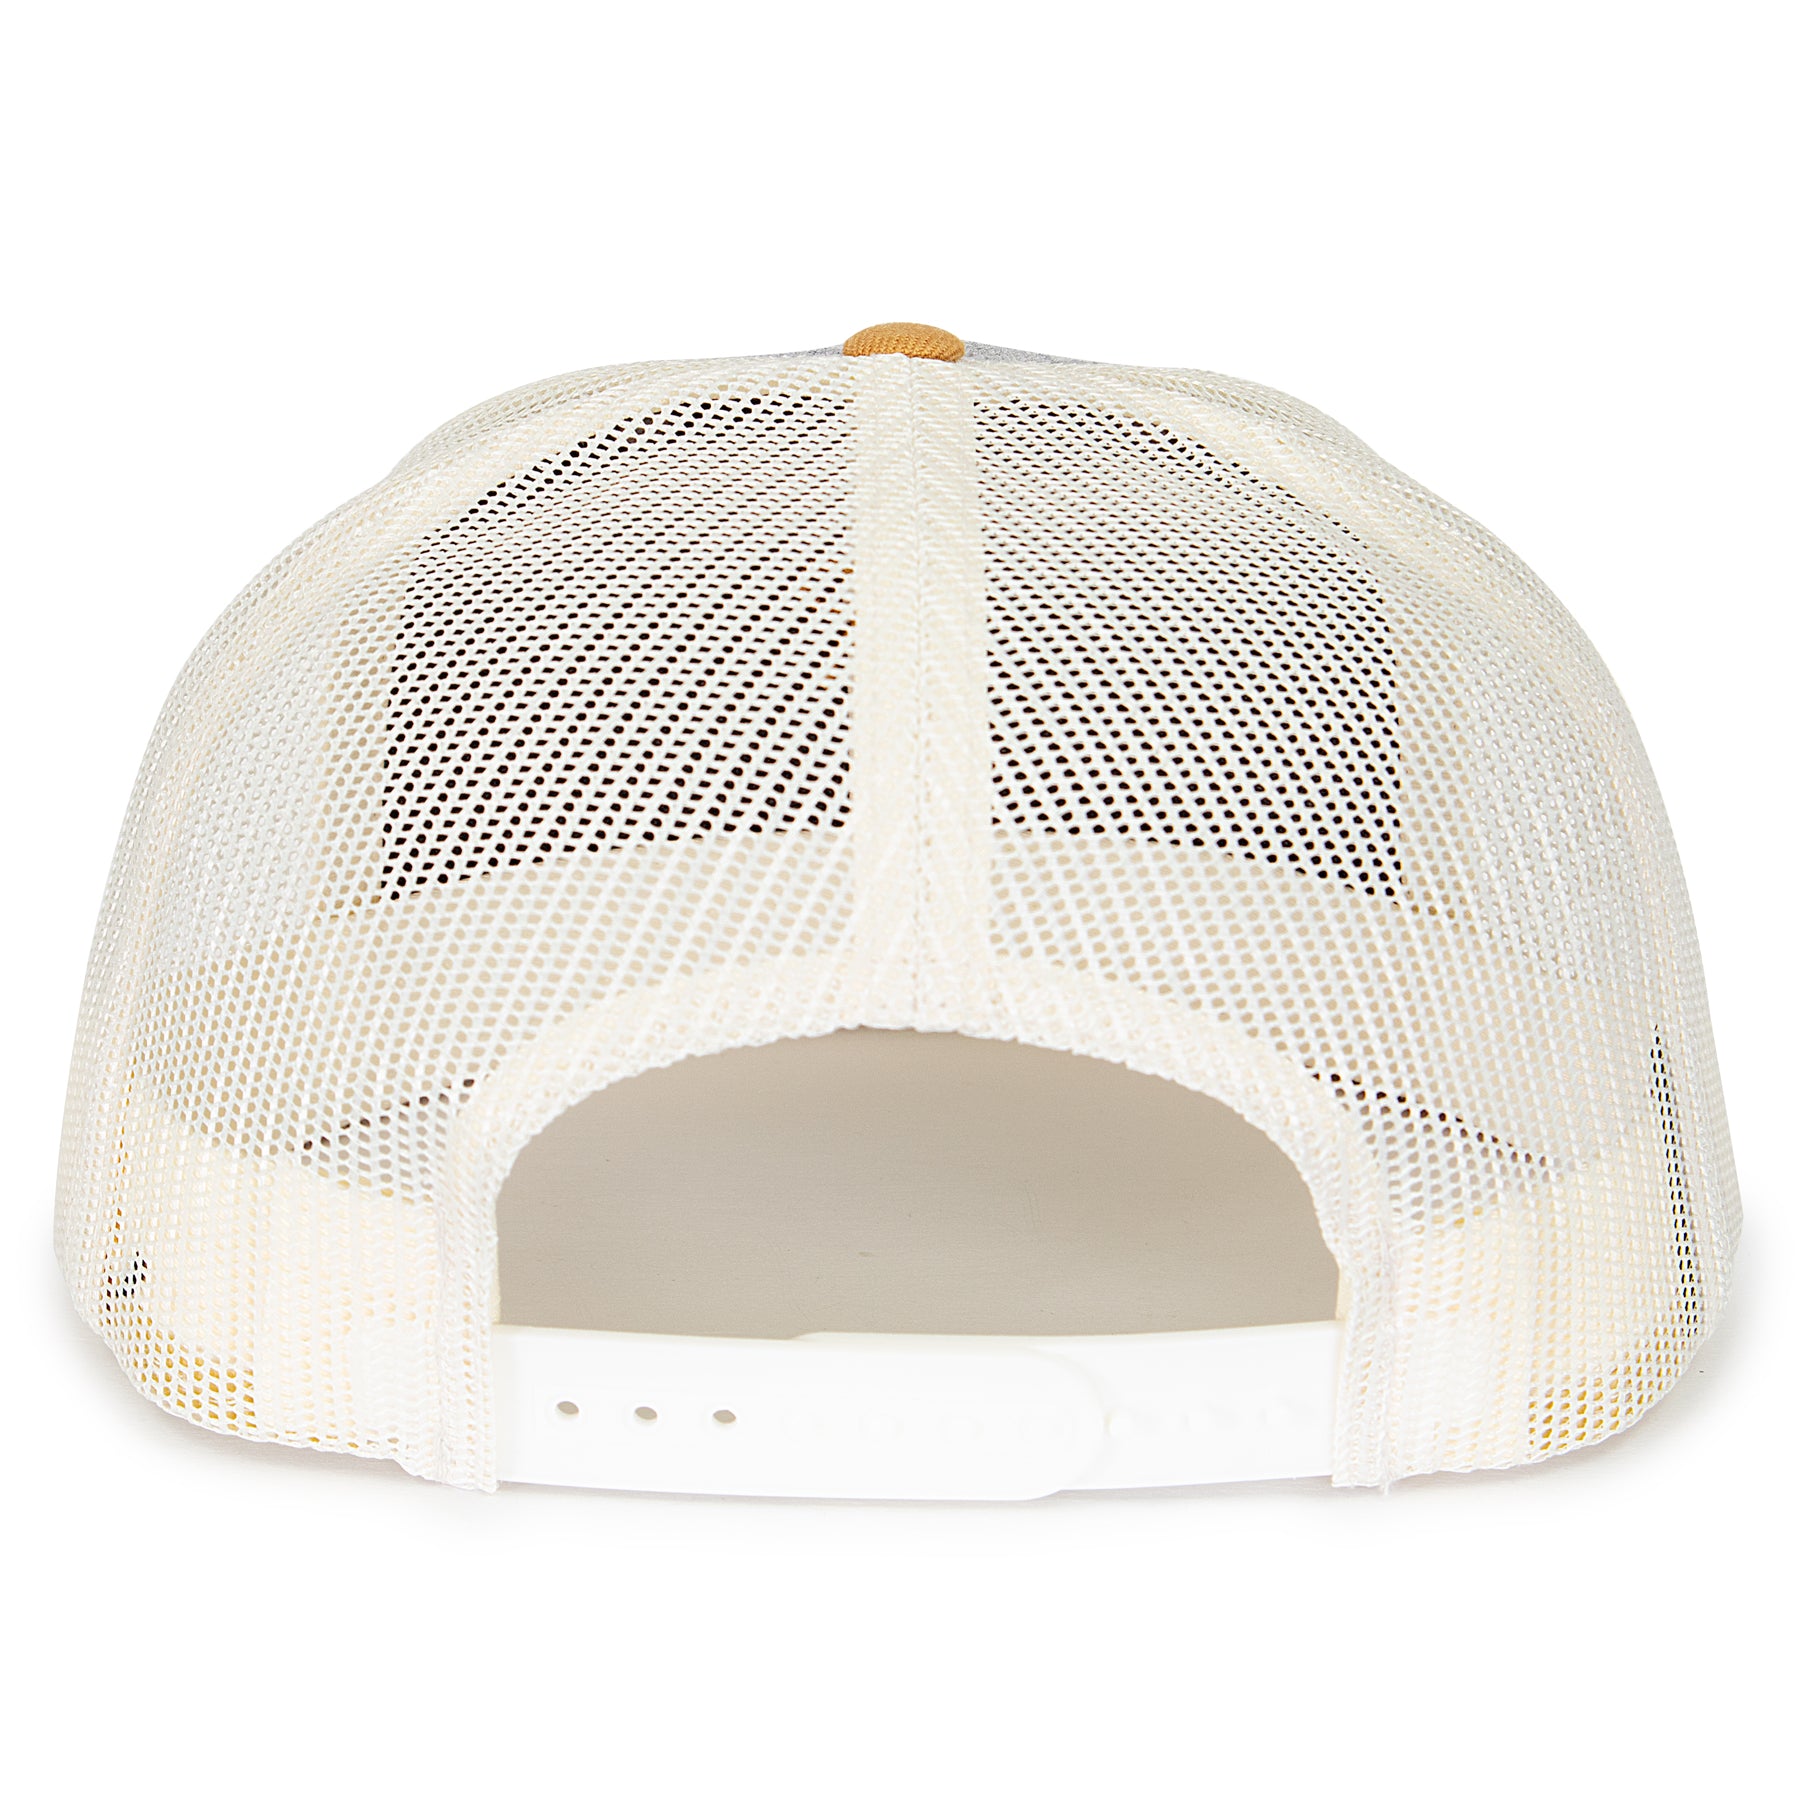 Birch Snapback Ball Cap from The Longhairs